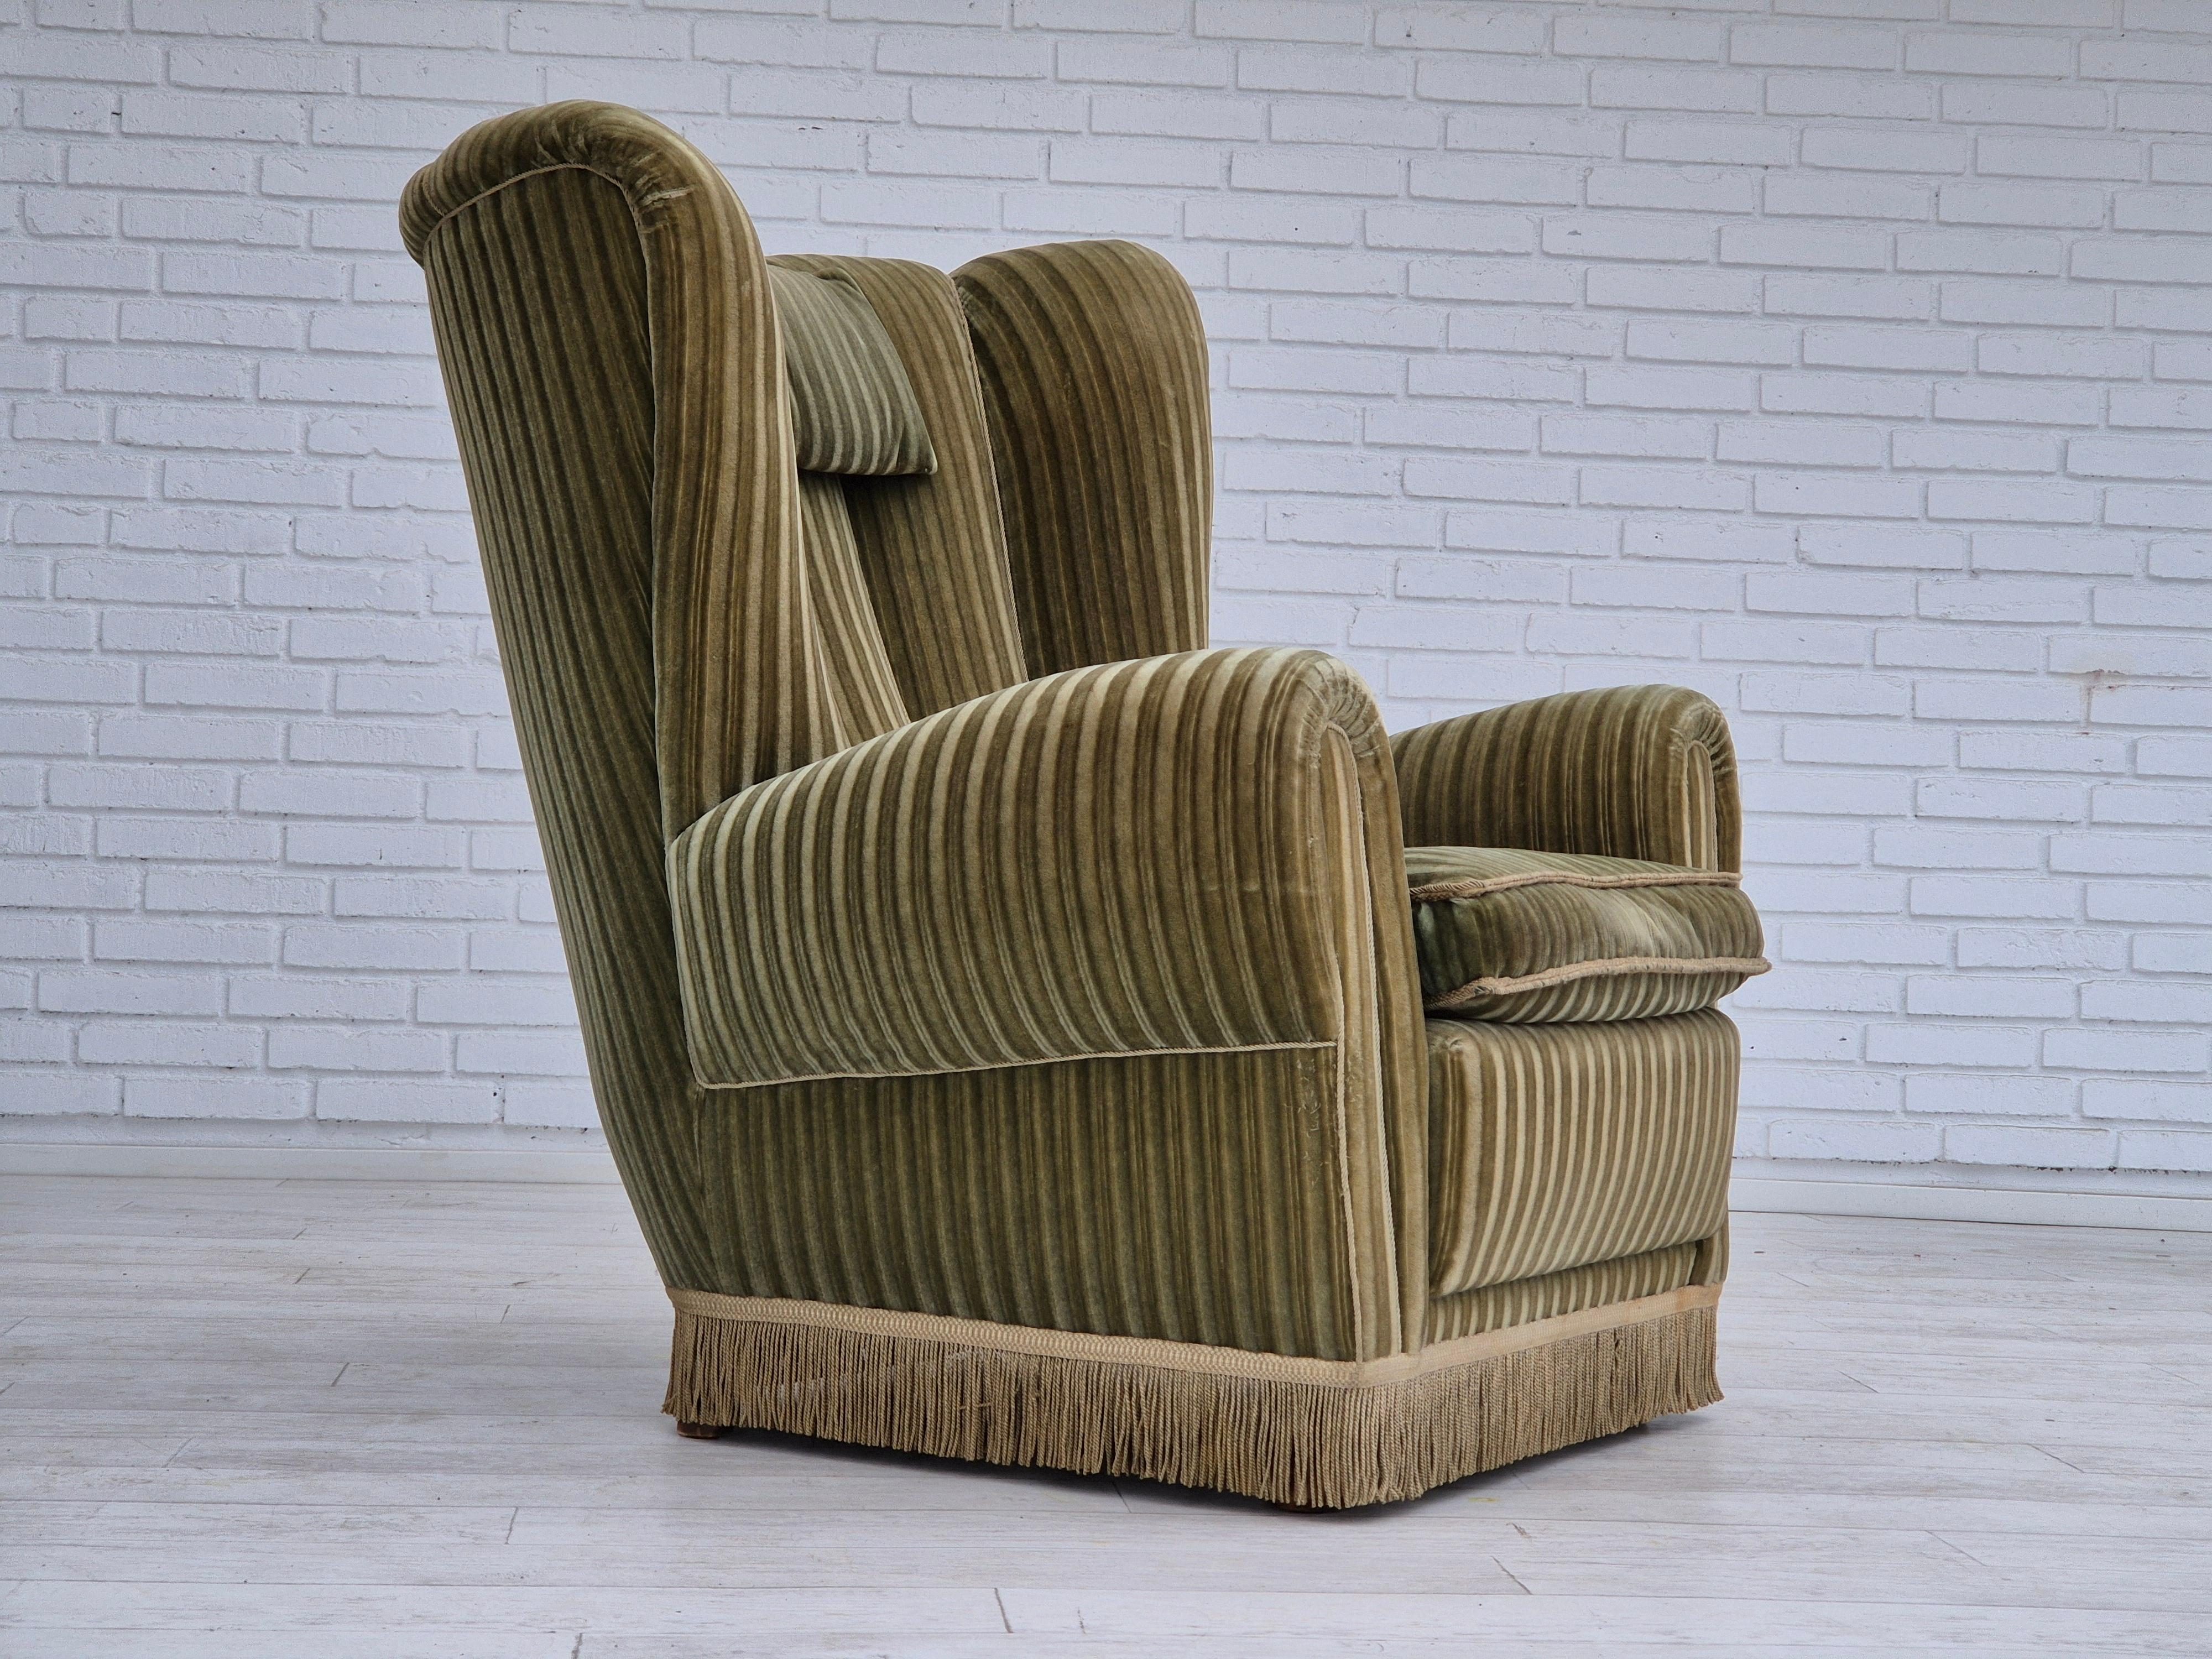 1960s, Danish highback relax armchair in original very good condition: no smells and no stains. Original green furniture velour. Springs in the seat, beech wood legs. Manufactured by Danish furniture manufacturer in about 1960-65s.